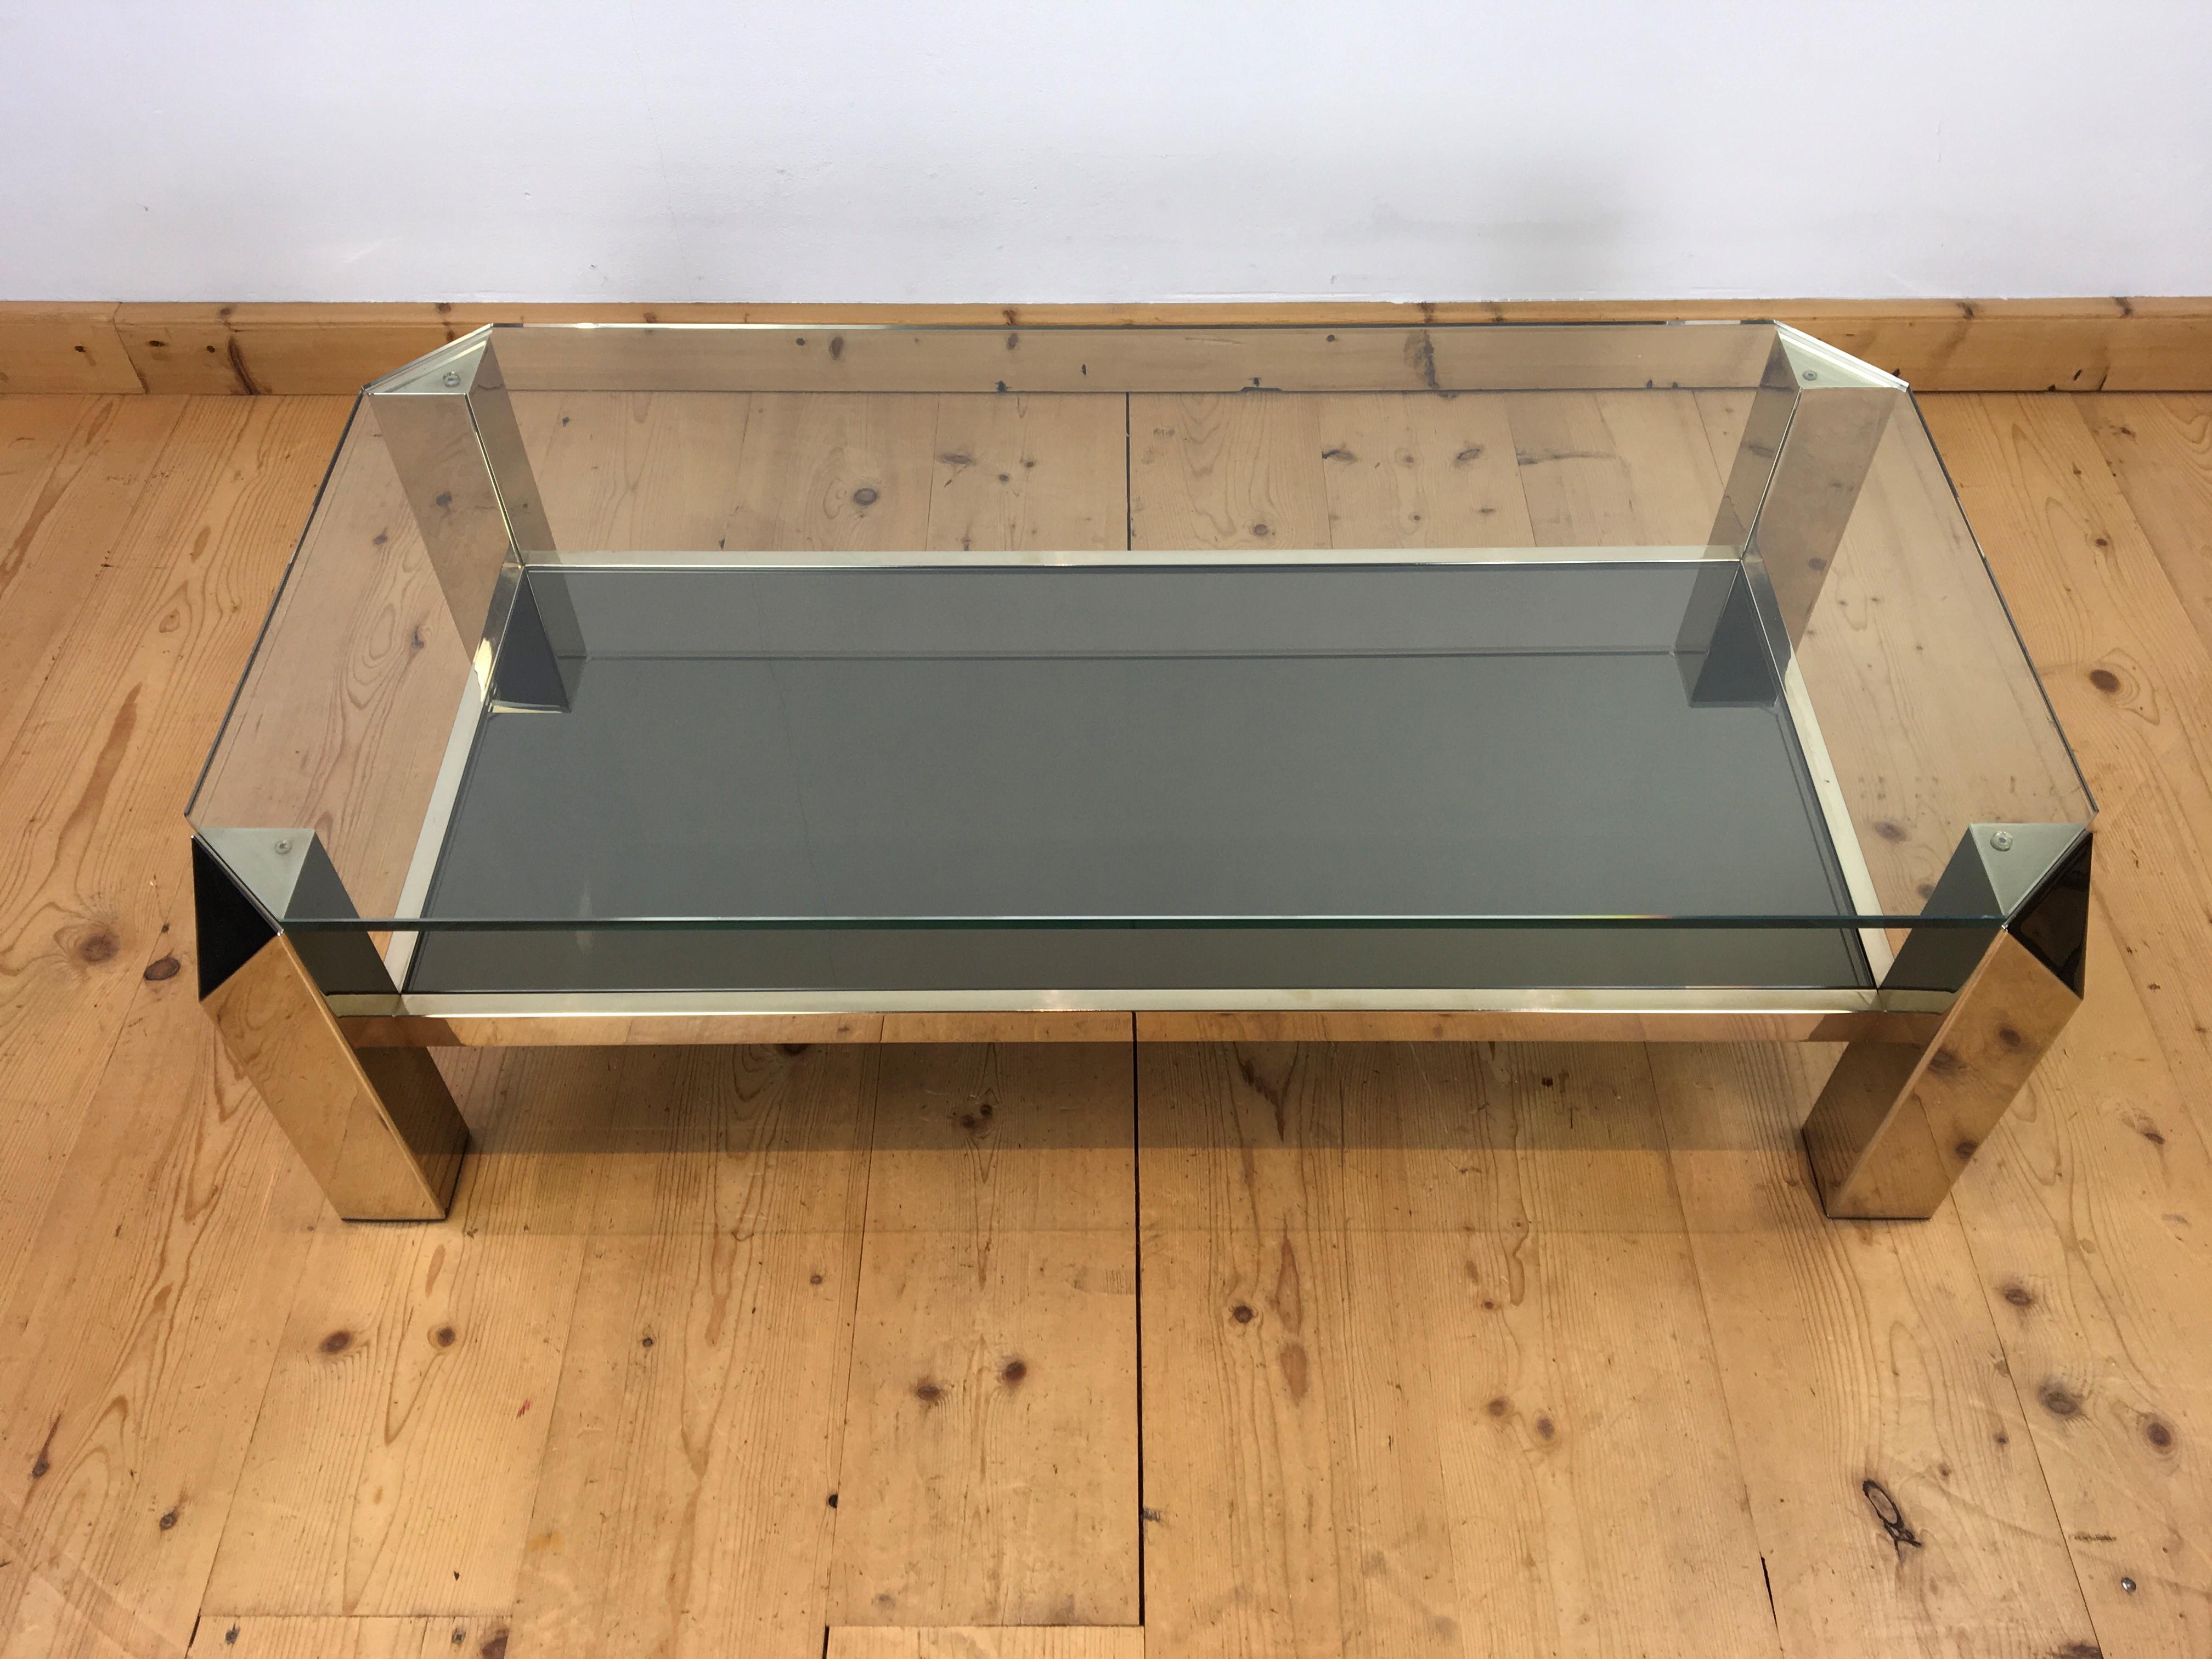 Great looking coffee table by Belgo Chrome - Dewulf selection.
A two tier coffee table with a 23kt gold plated - 23kt gilt base. 
The legs of this elongated - rectangular Belgo Chrom coffee table have a geometric design. 
This low coffee table